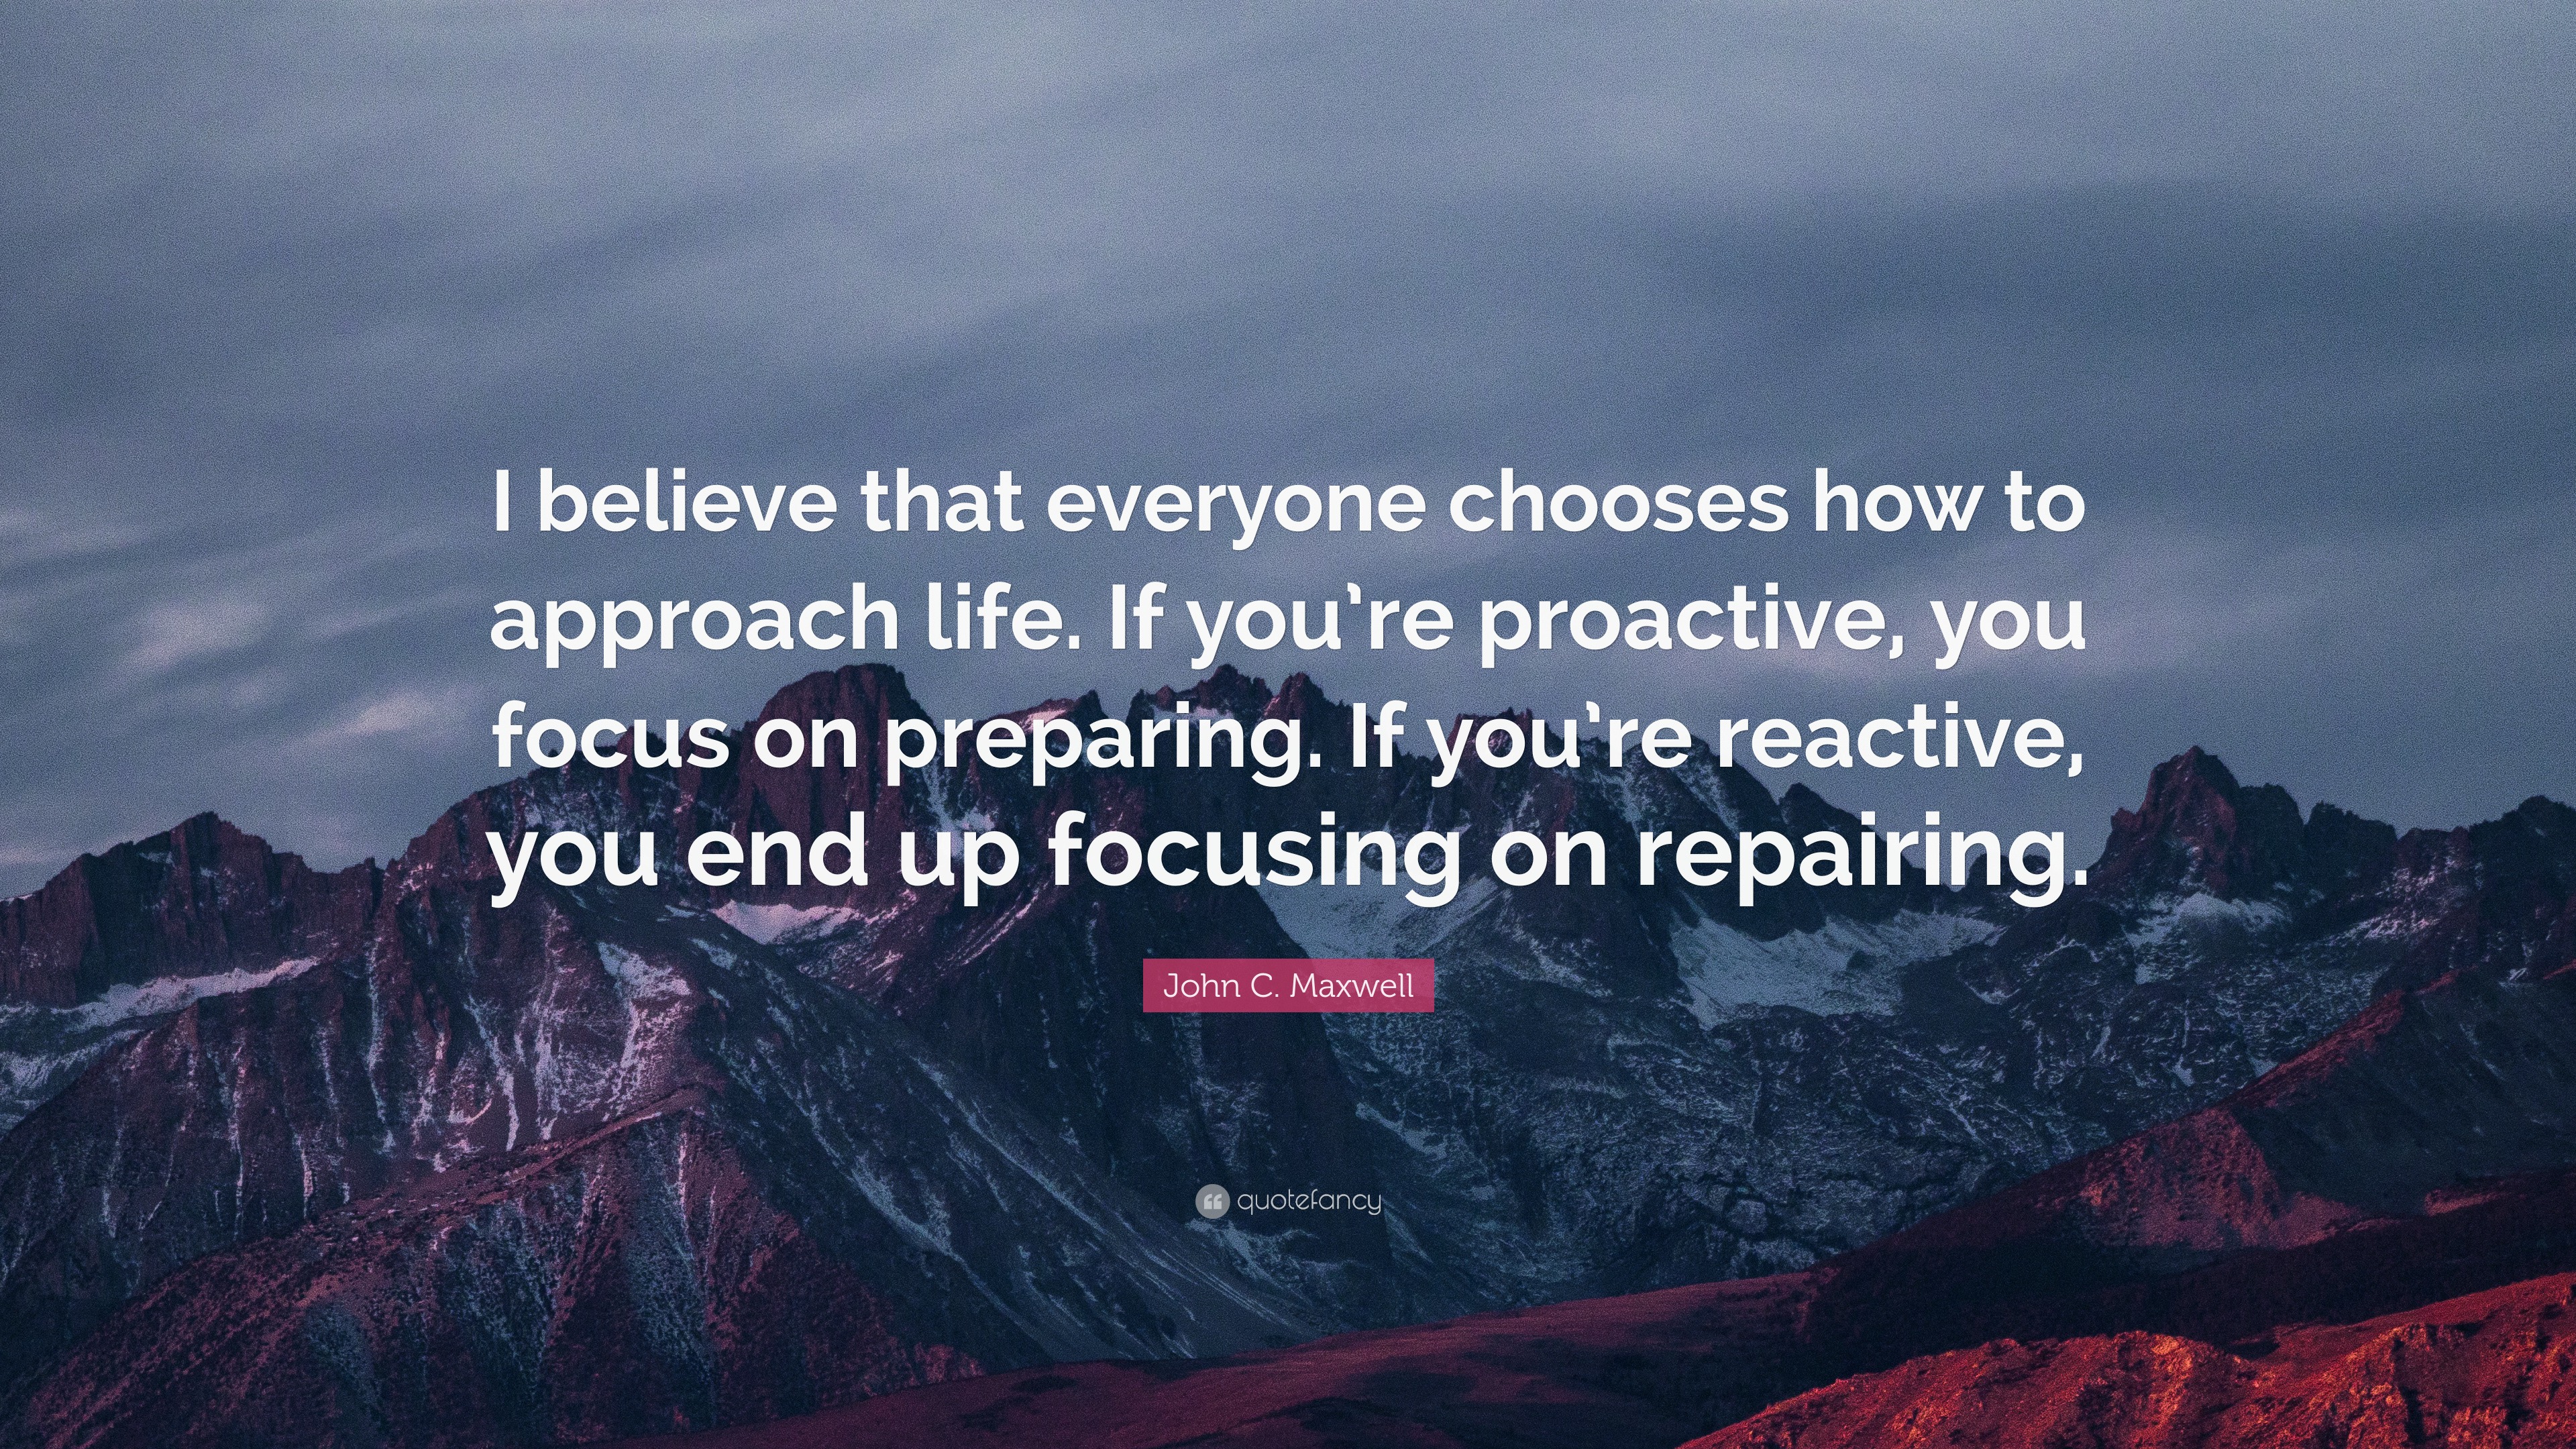 John C Maxwell Quote I Believe That Everyone Chooses How To Approach Life If You Re Proactive You Focus On Preparing If You Re Reactive Y